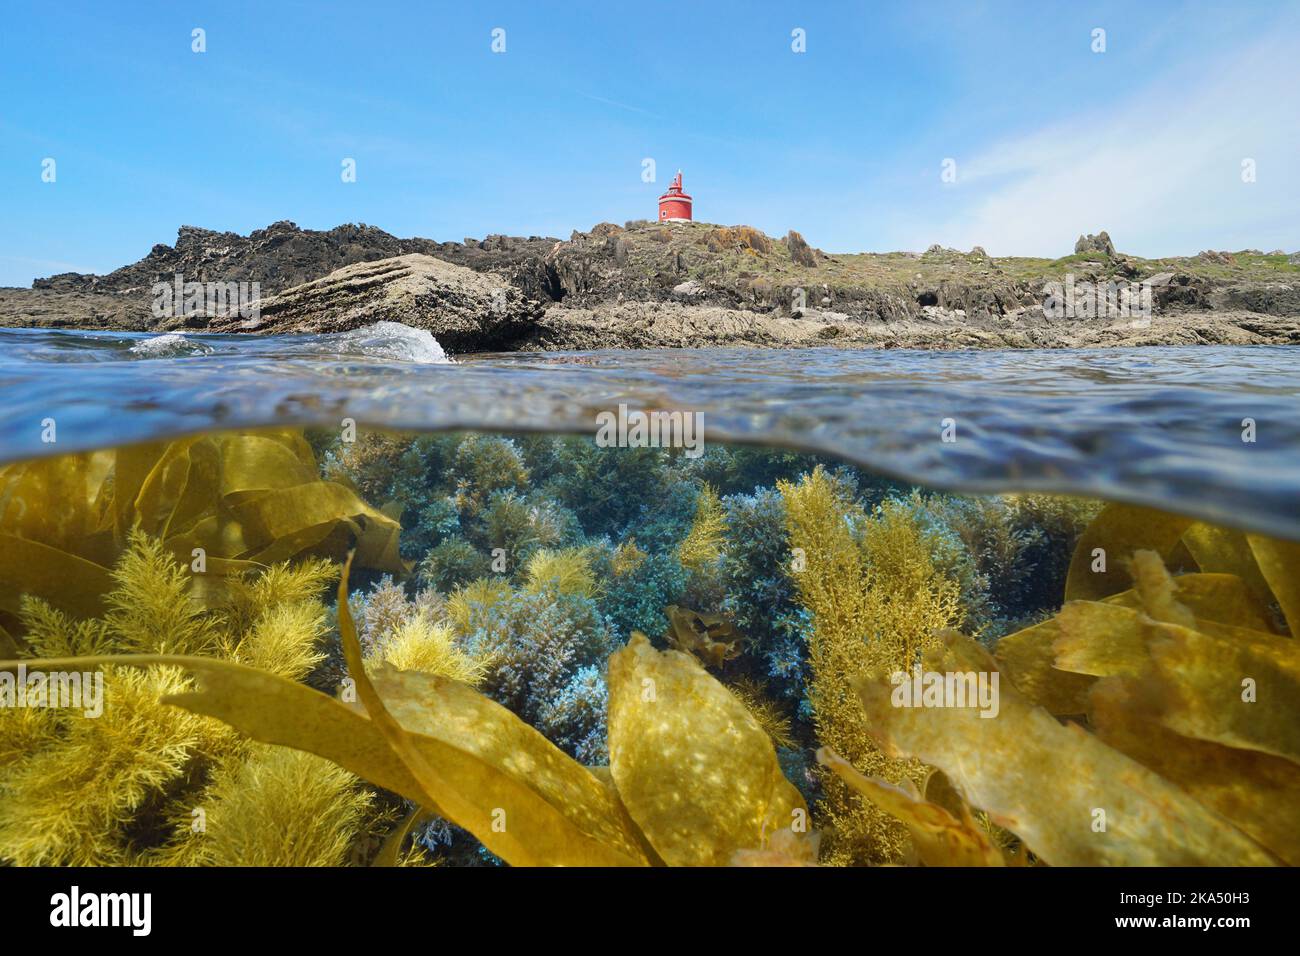 Coastline with a lighthouse and algae underwater, split level view over and under water surface, Atlantic ocean, Spain, Galicia, Rias Baixas Stock Photo